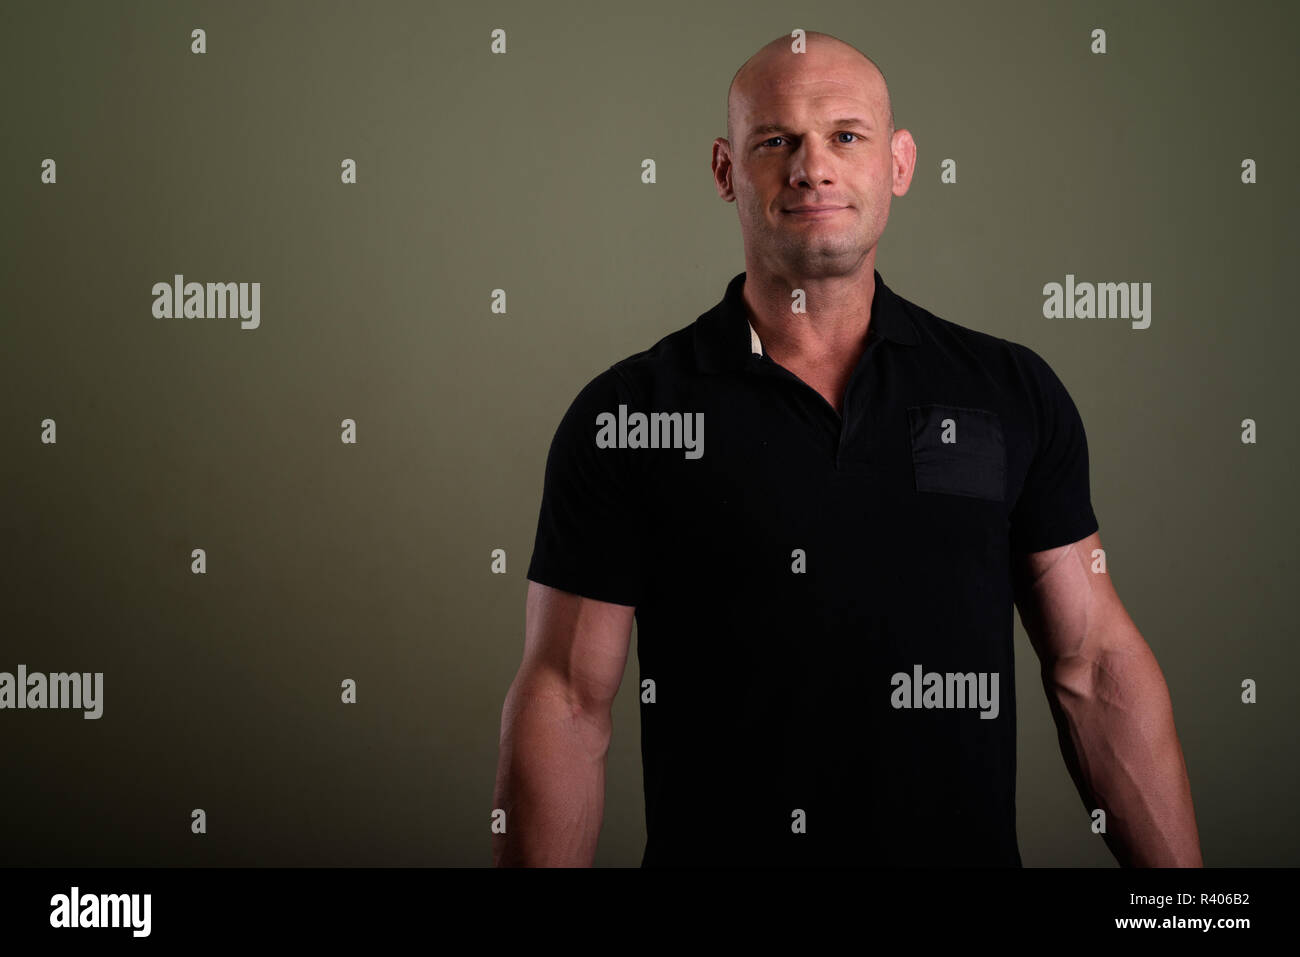 Bald man wearing black shirt against colored background  Stock Photo